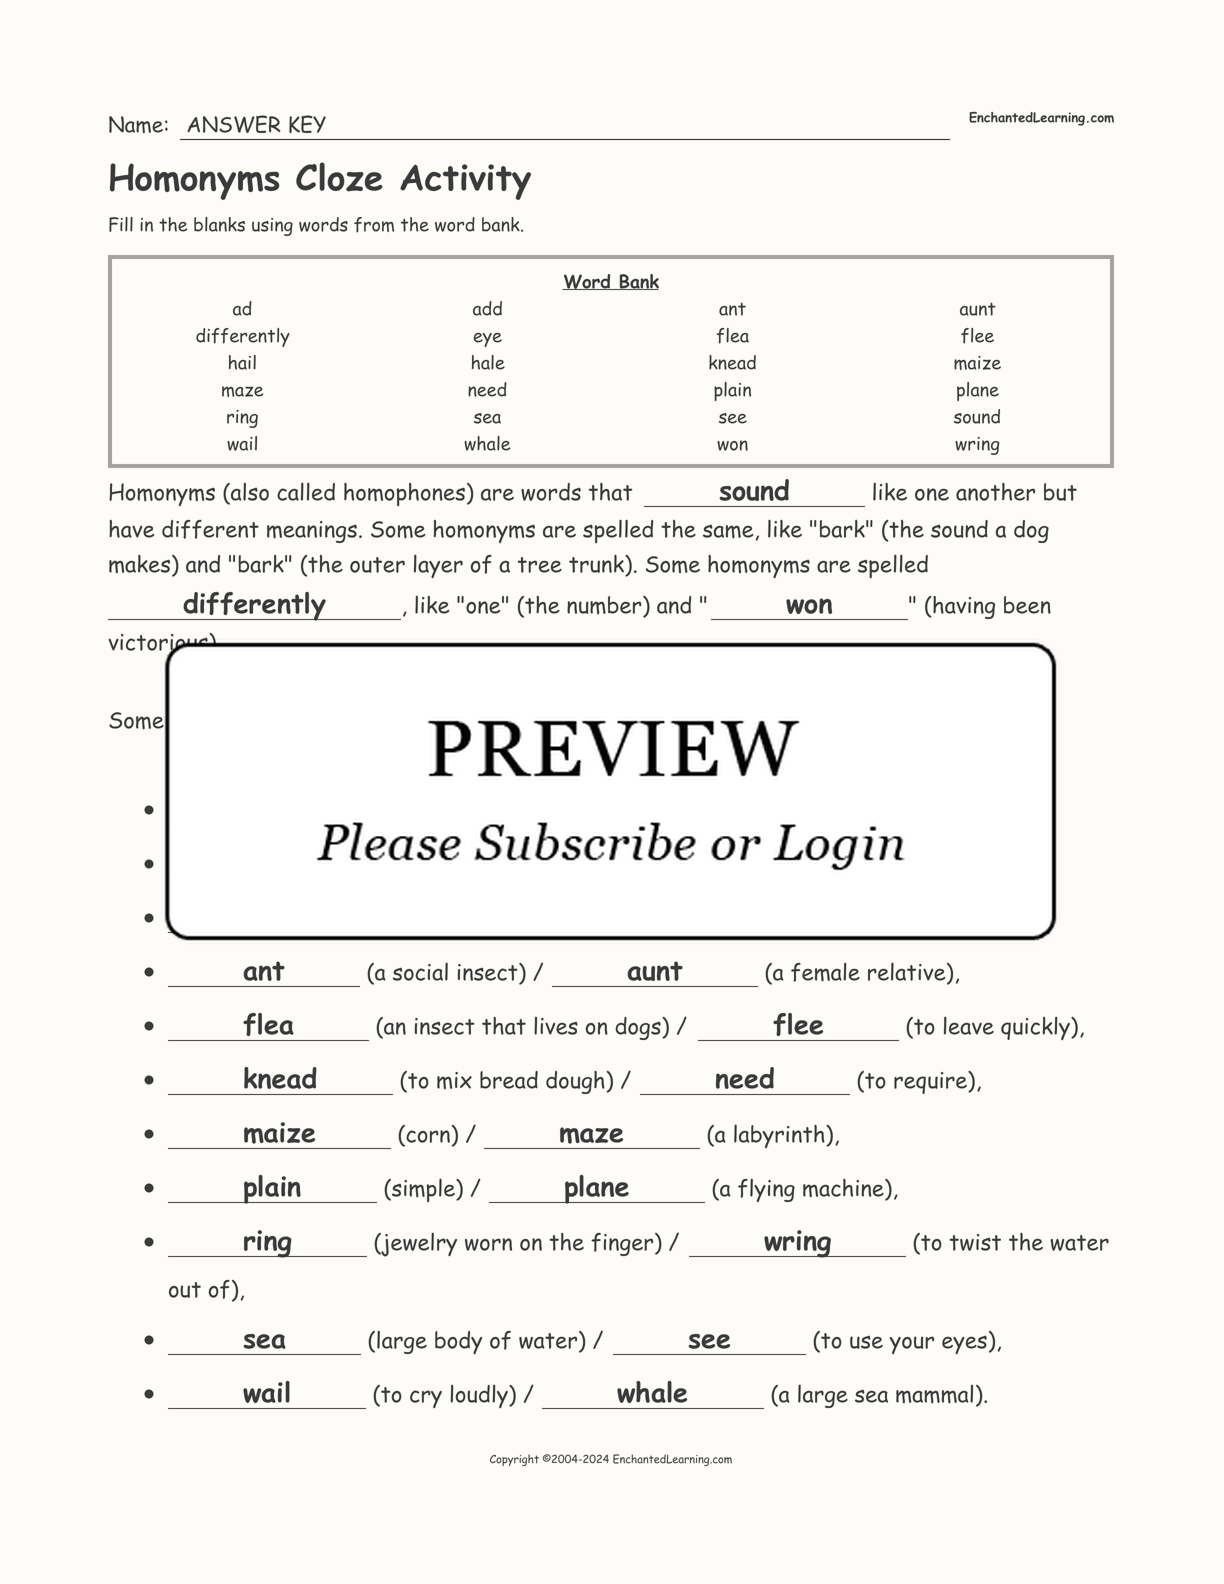 Homonyms Cloze Activity interactive worksheet page 2